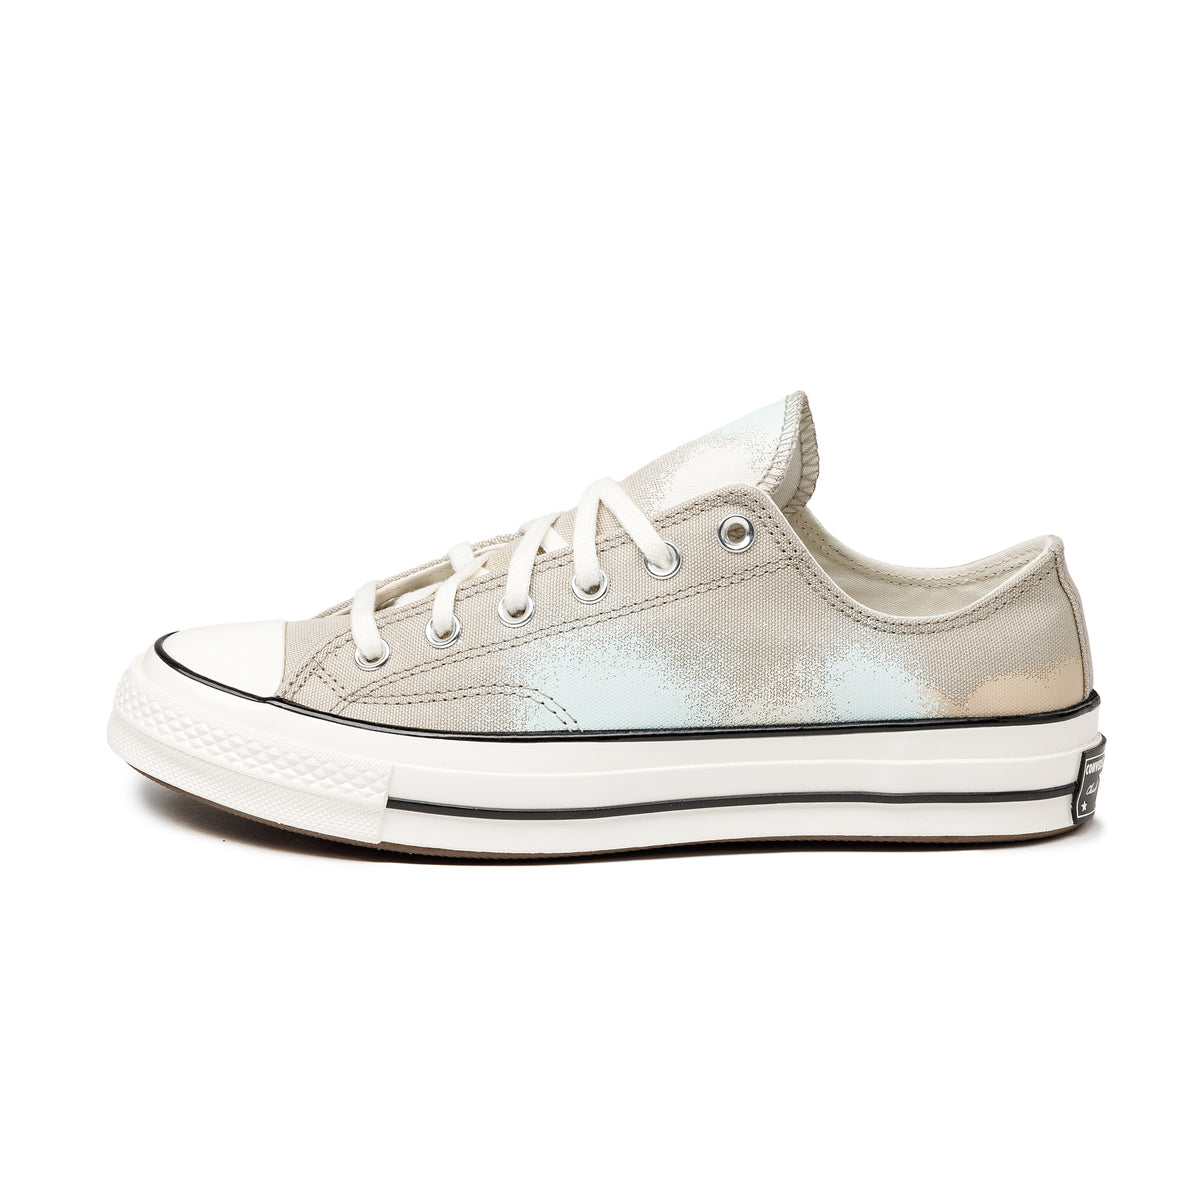 Converse Chuck Taylor All Star '70 OX » Buy online now!